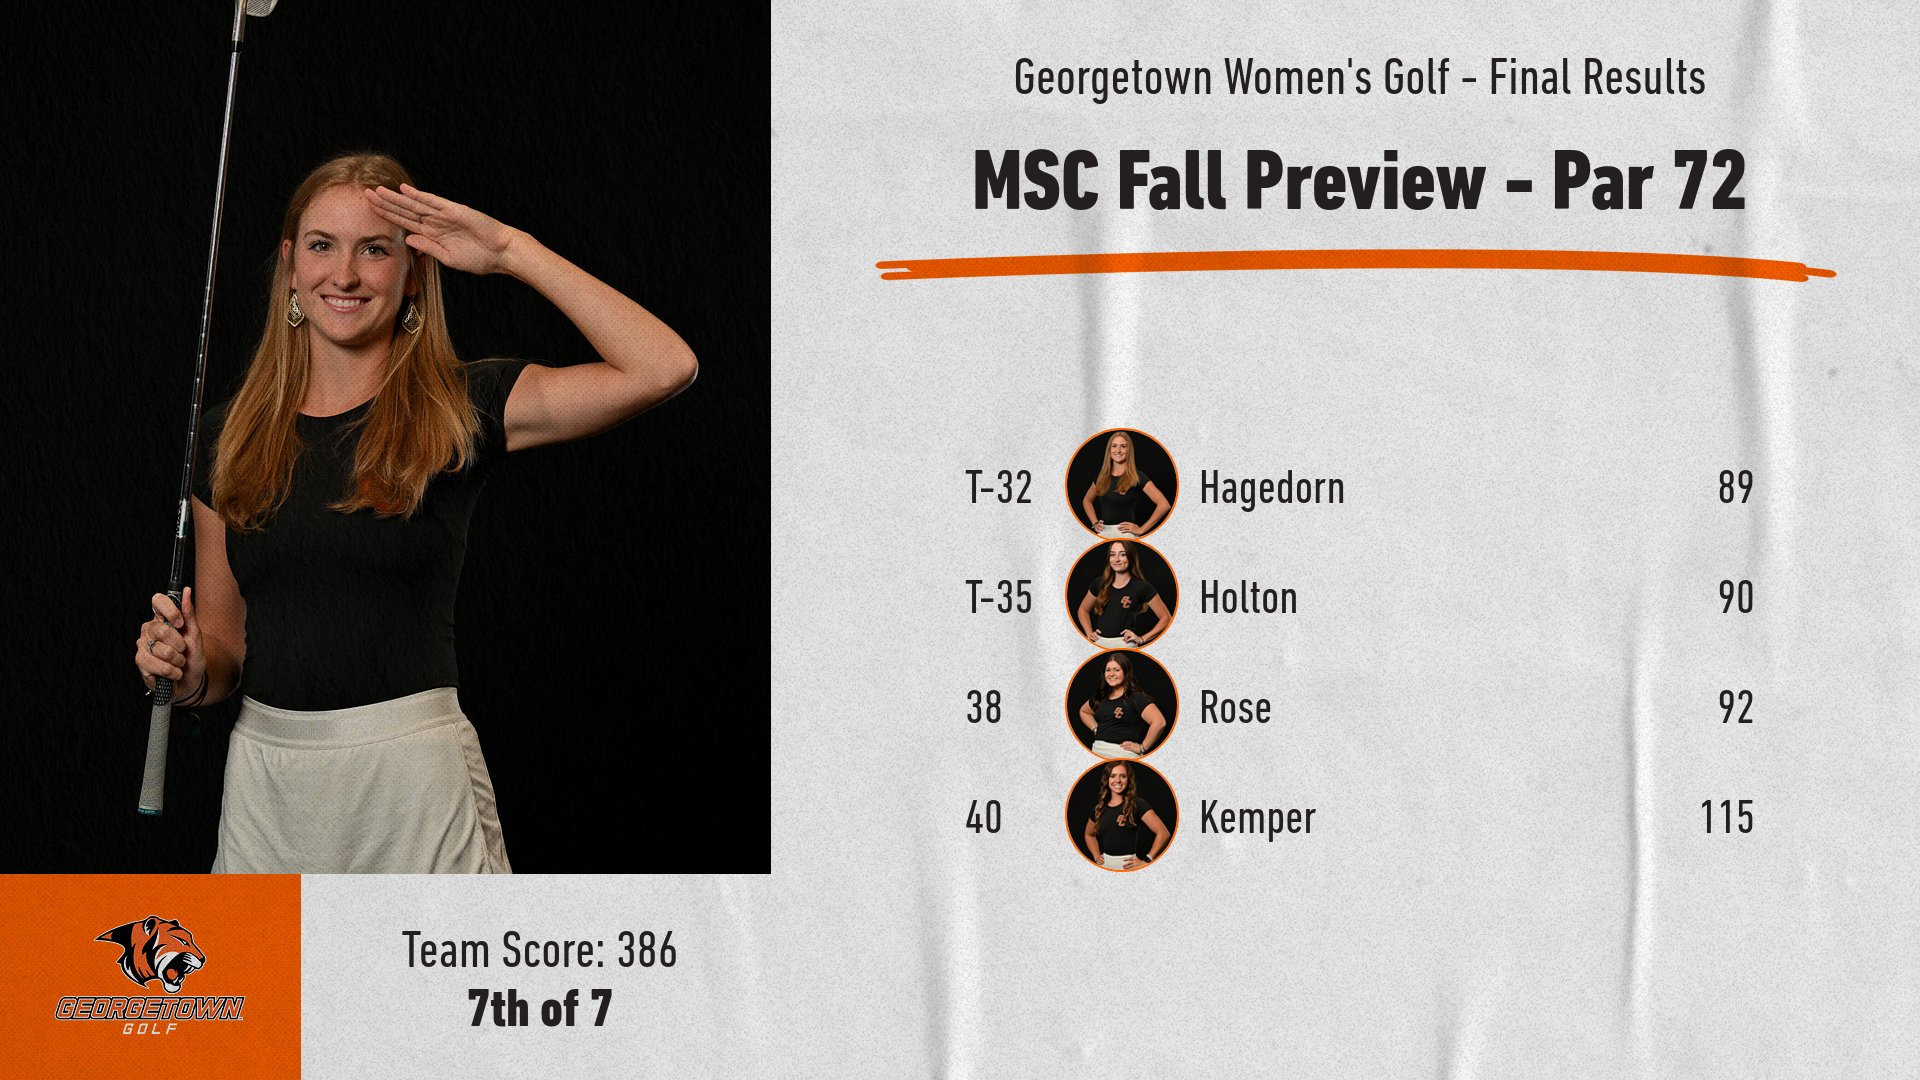 Hagedorn the low Tiger after Day 1 at MSC Preview